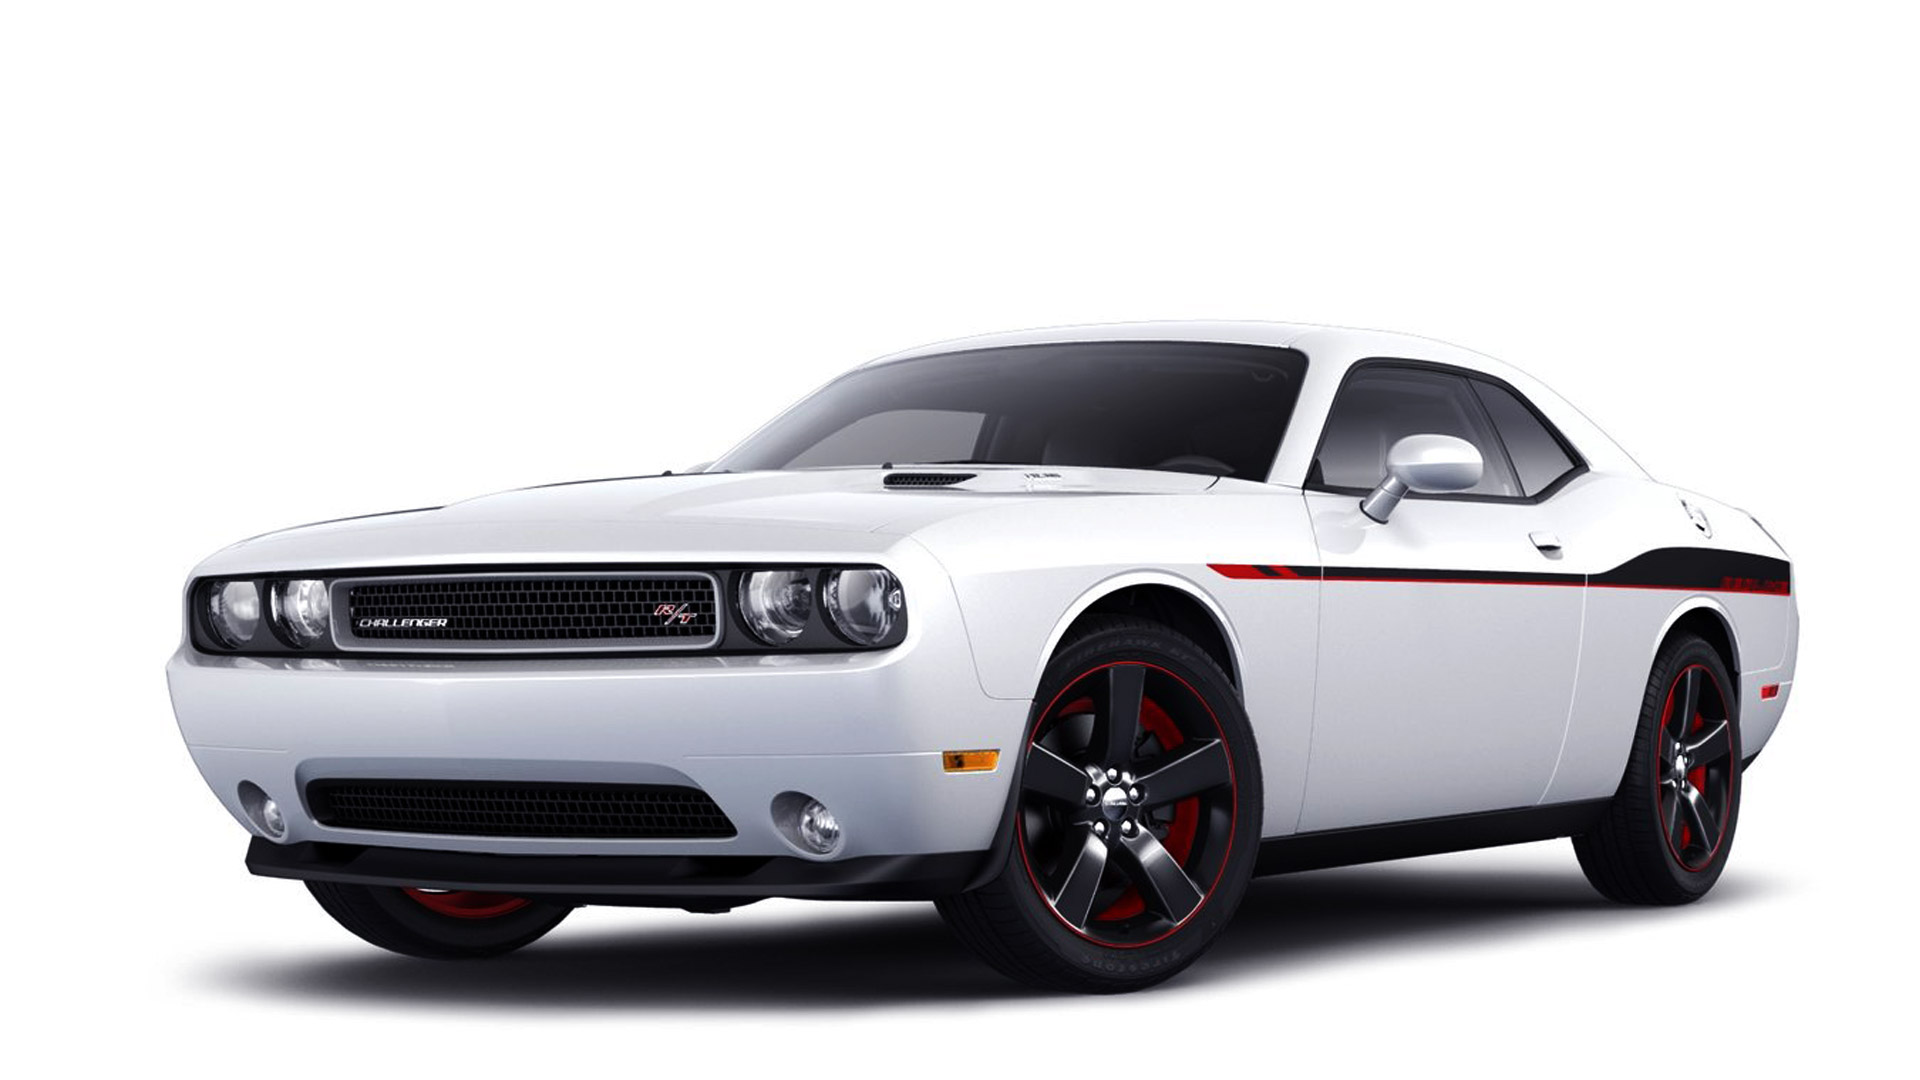 New 2014 Dodge Challenger Pictures Photos Images HD Wallpapers Collection